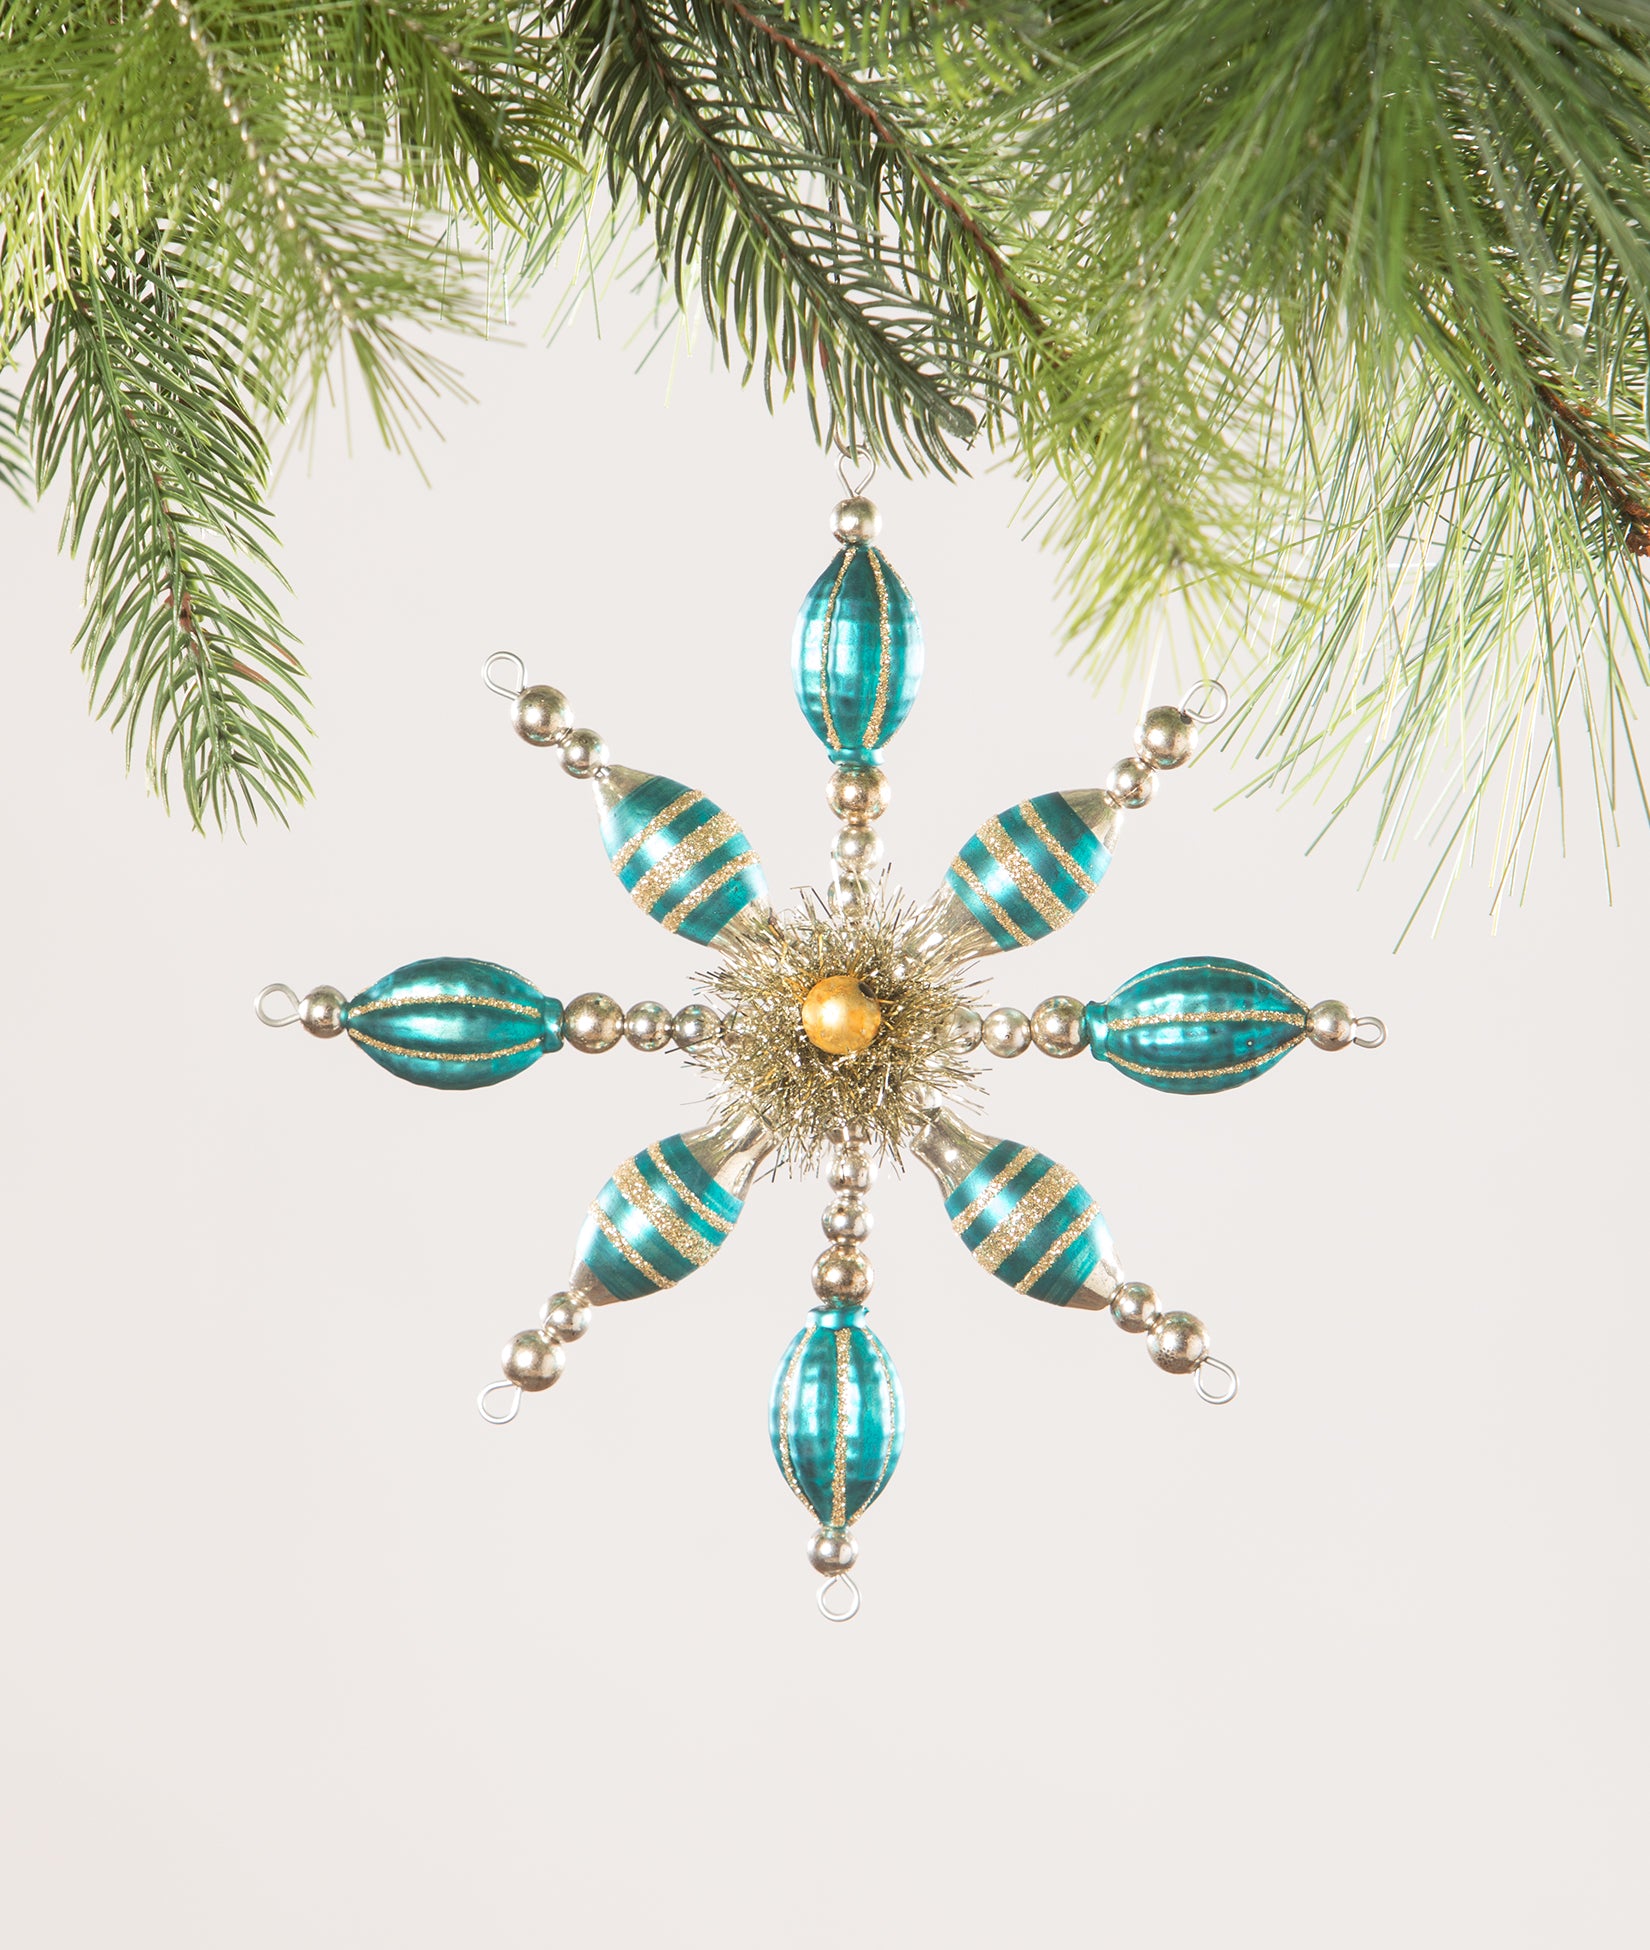 Vintage Style Turquoise Starburst Ornament by Bethany Lowe